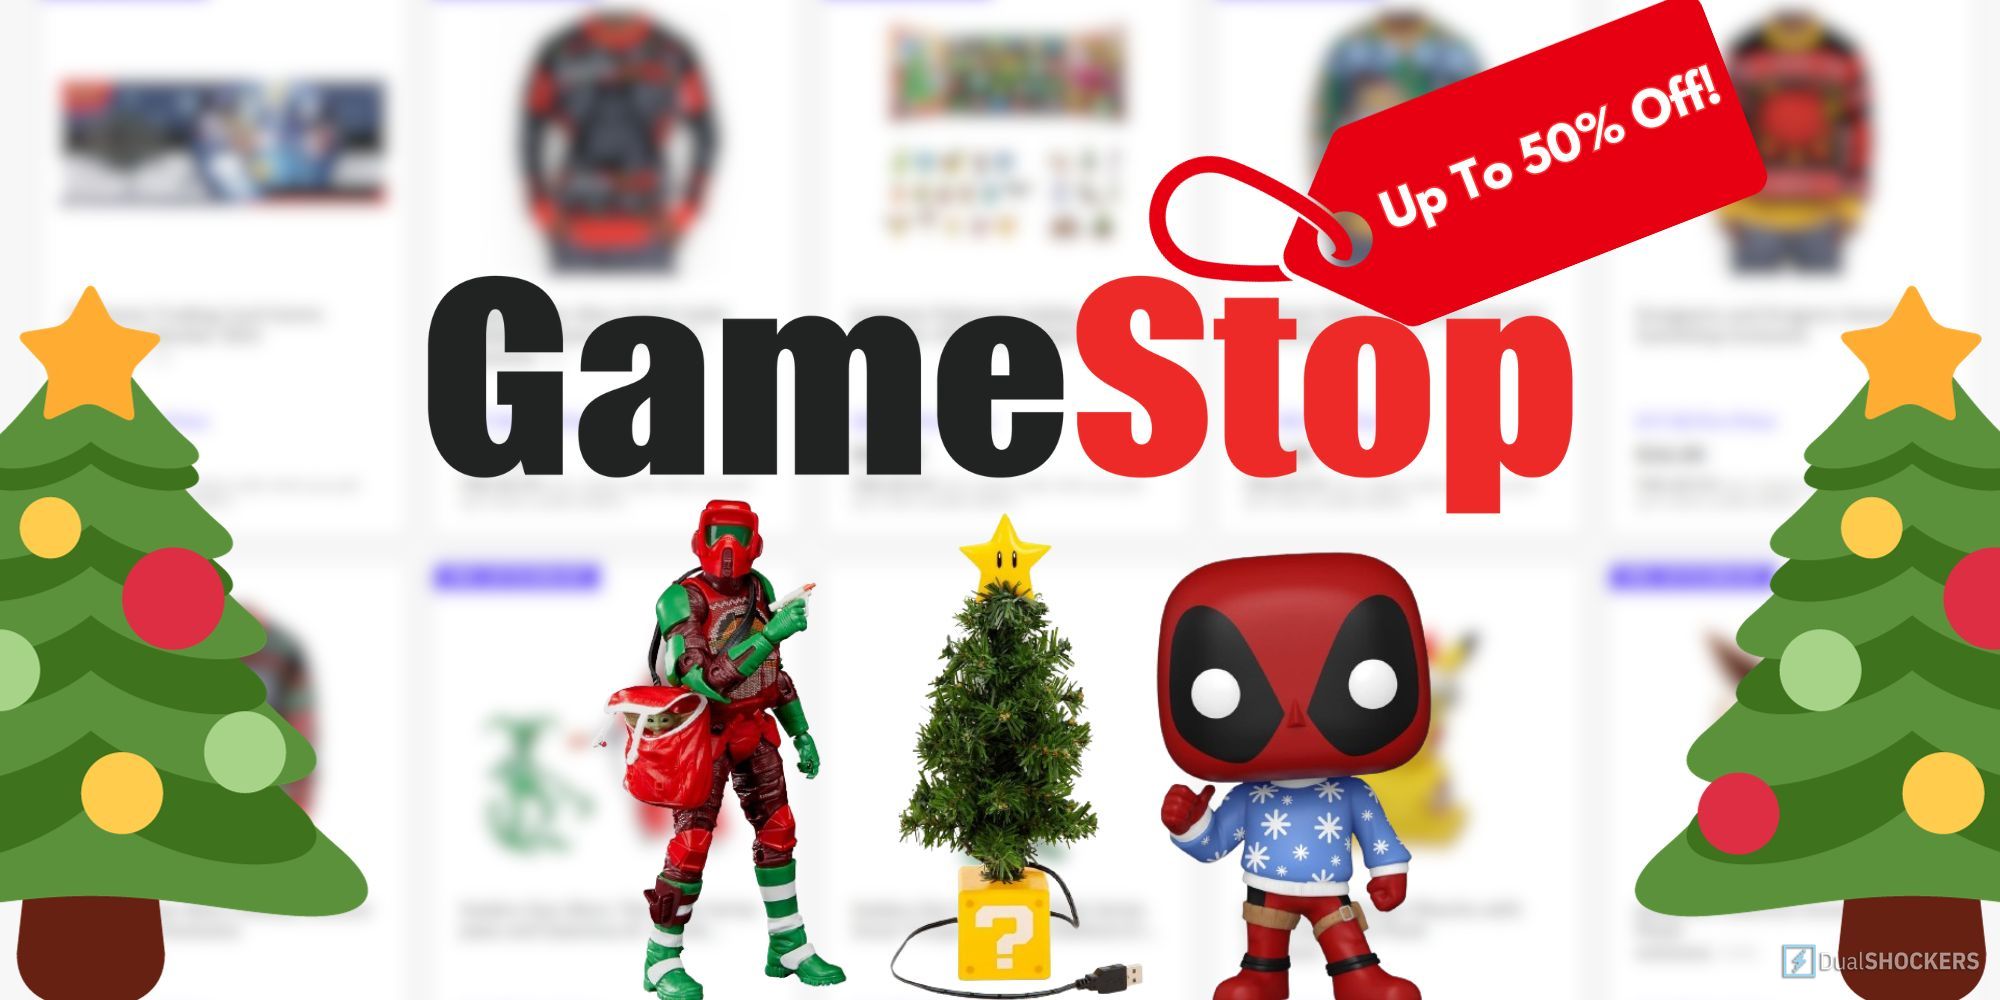 Merchandise feature image with the GameStop logo, two Christmas trees, a Star Wars Figure, Deadpool Funko Pop and a Super Mario mini tree